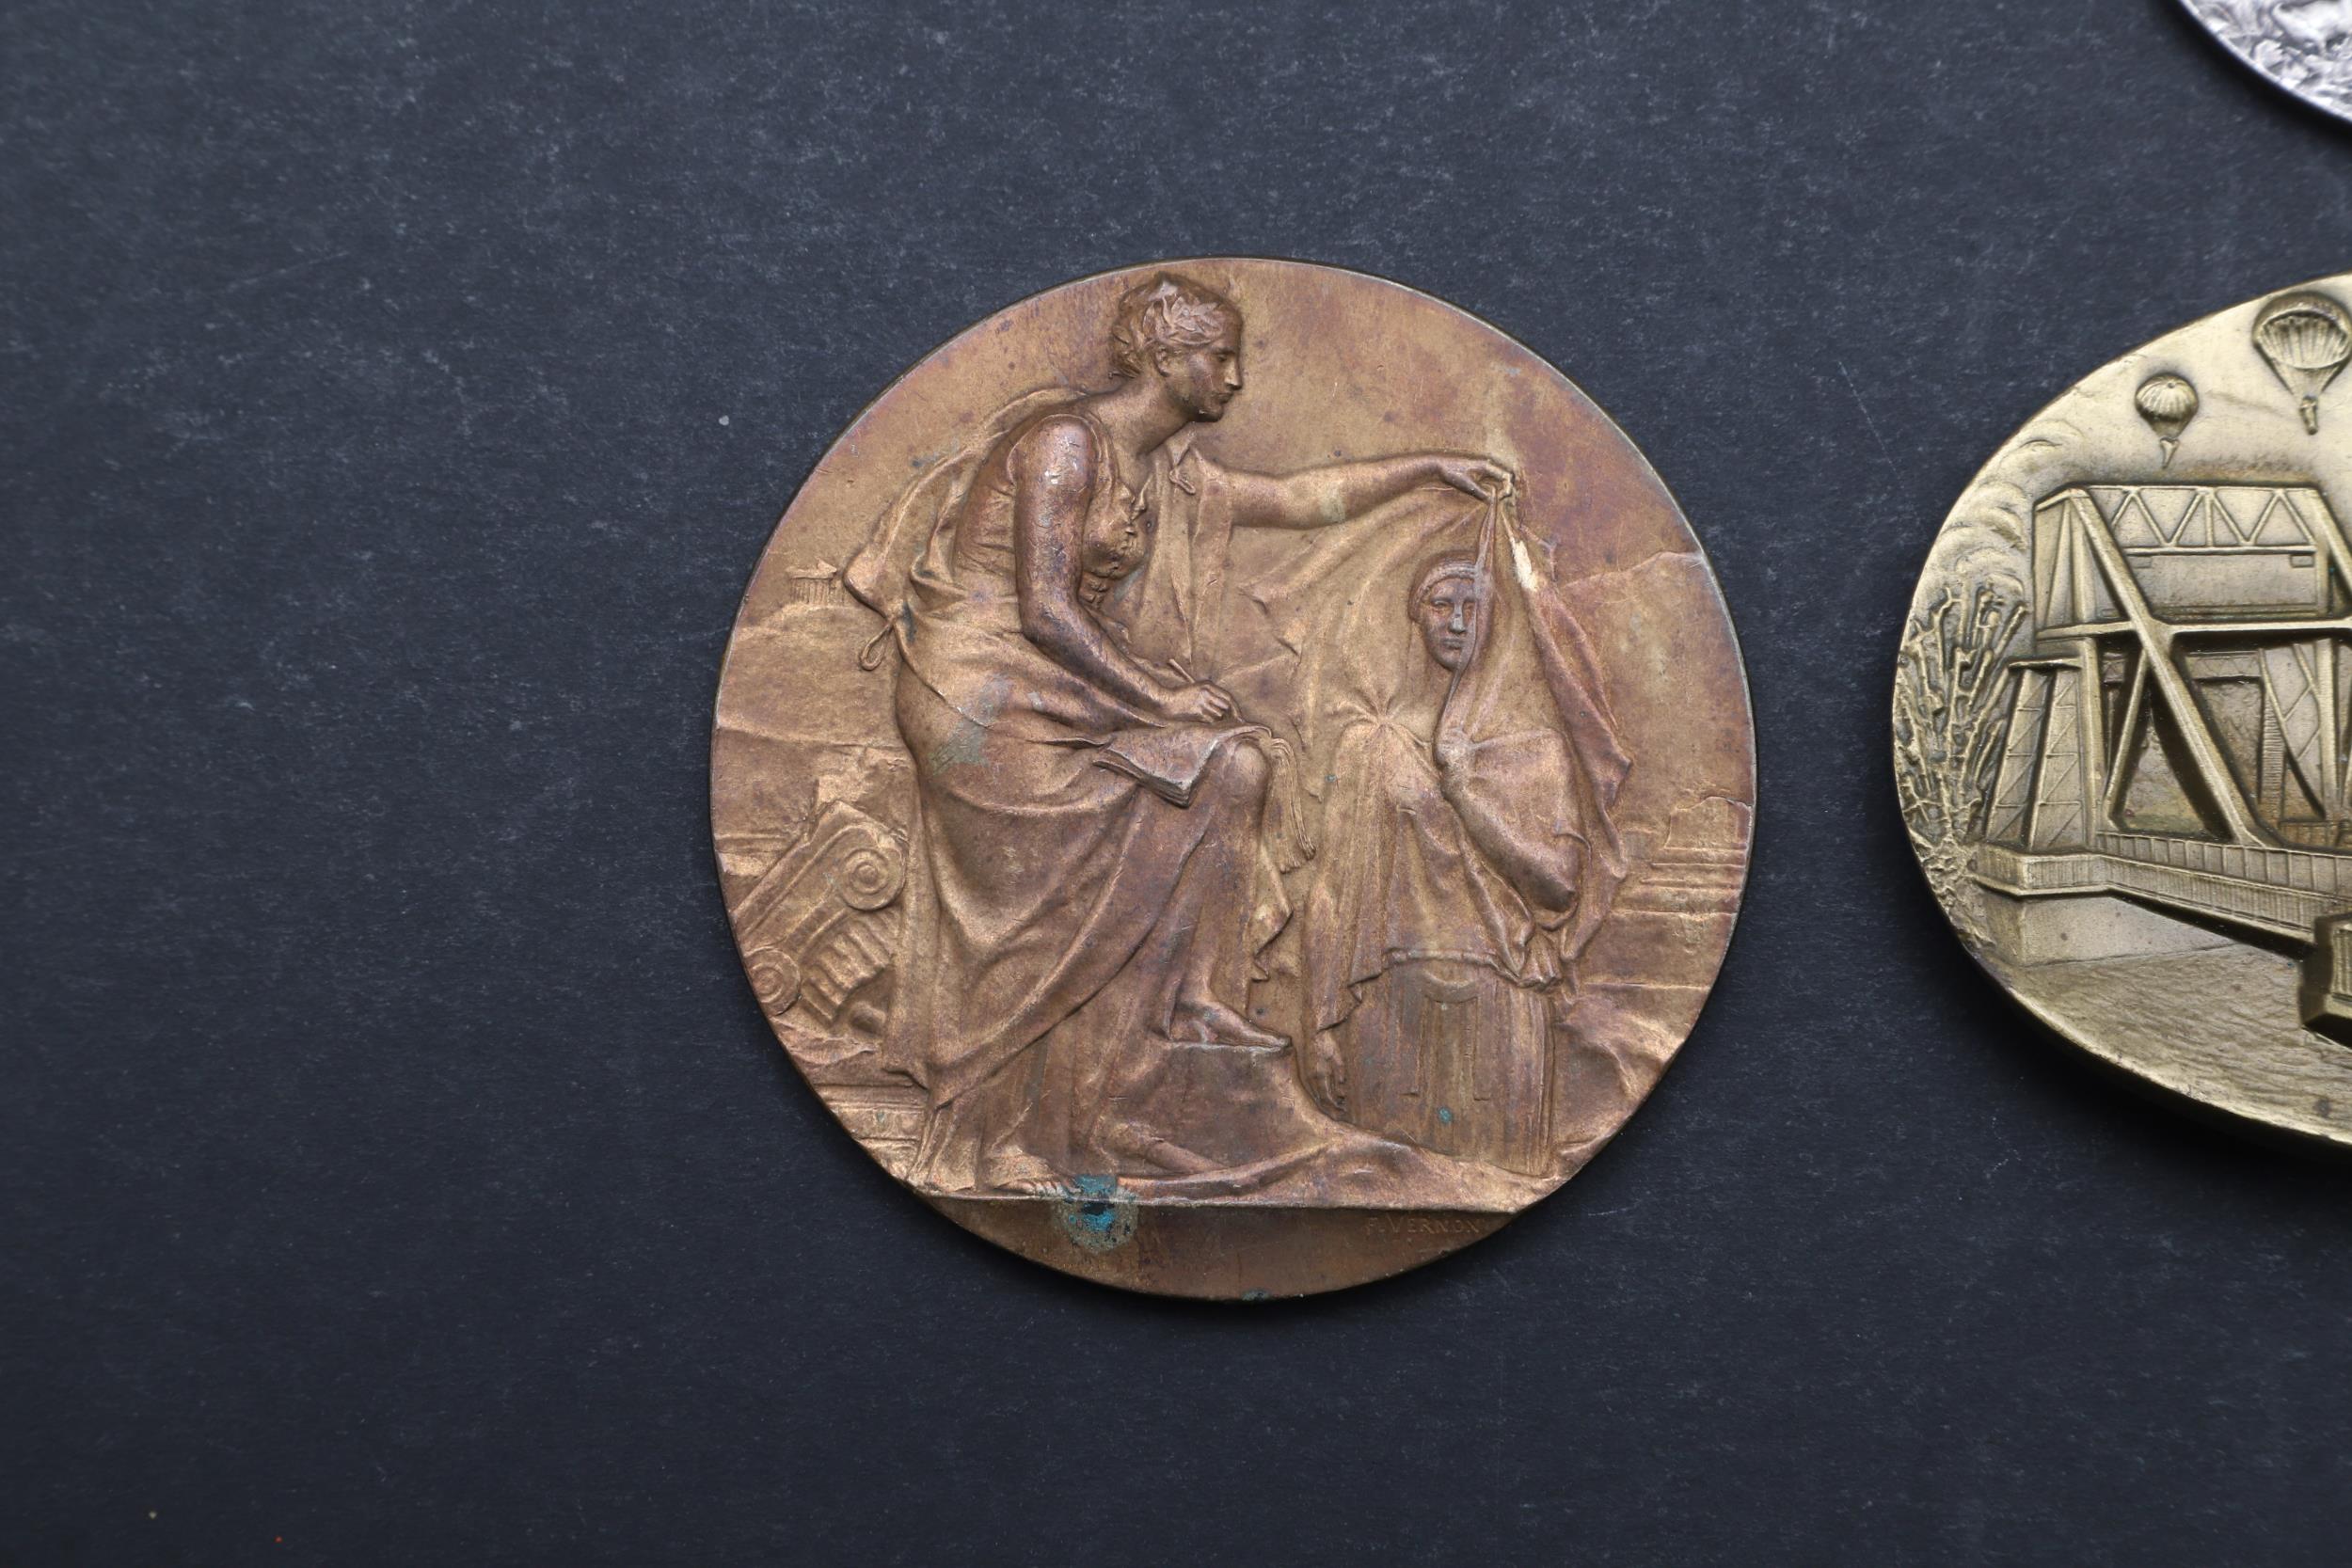 AN HISTORIC MEDAL COMMEMORATING THE BIRTH OF KAISER WILHELM II, AND THREE OTHERS. - Image 3 of 7